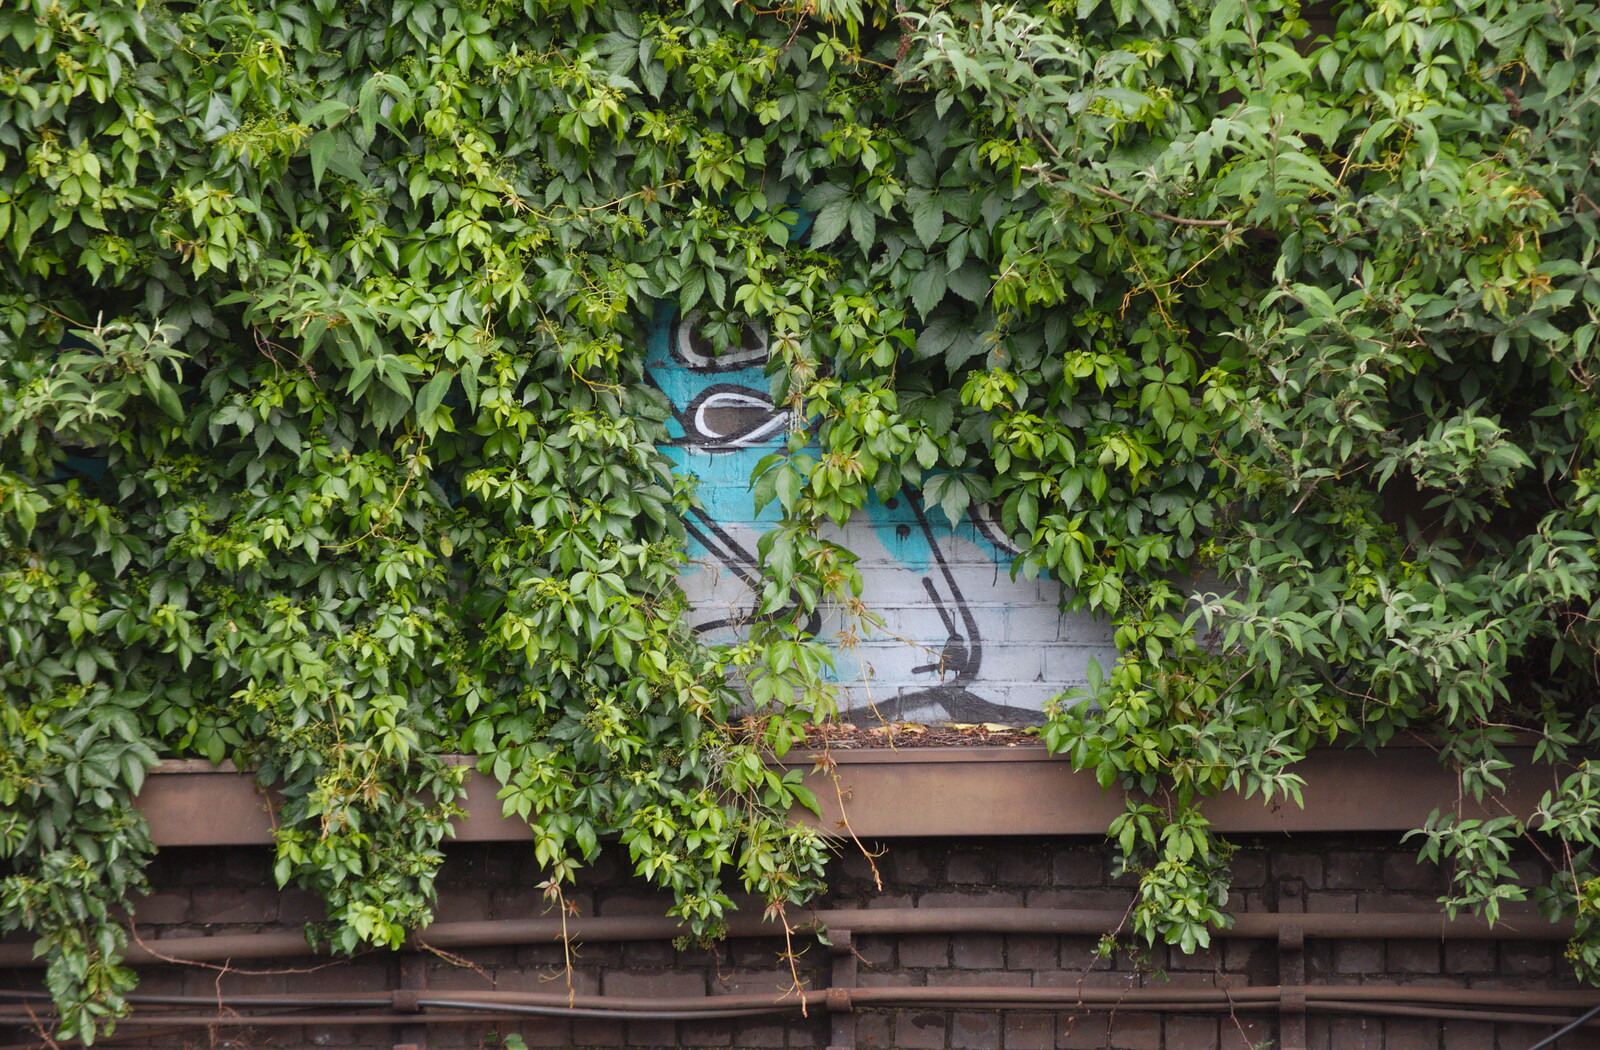 Some graffiti has been almost totally covered from A High-Pressure Watermain and some Graffiti, Eye and London - 11th June 2019